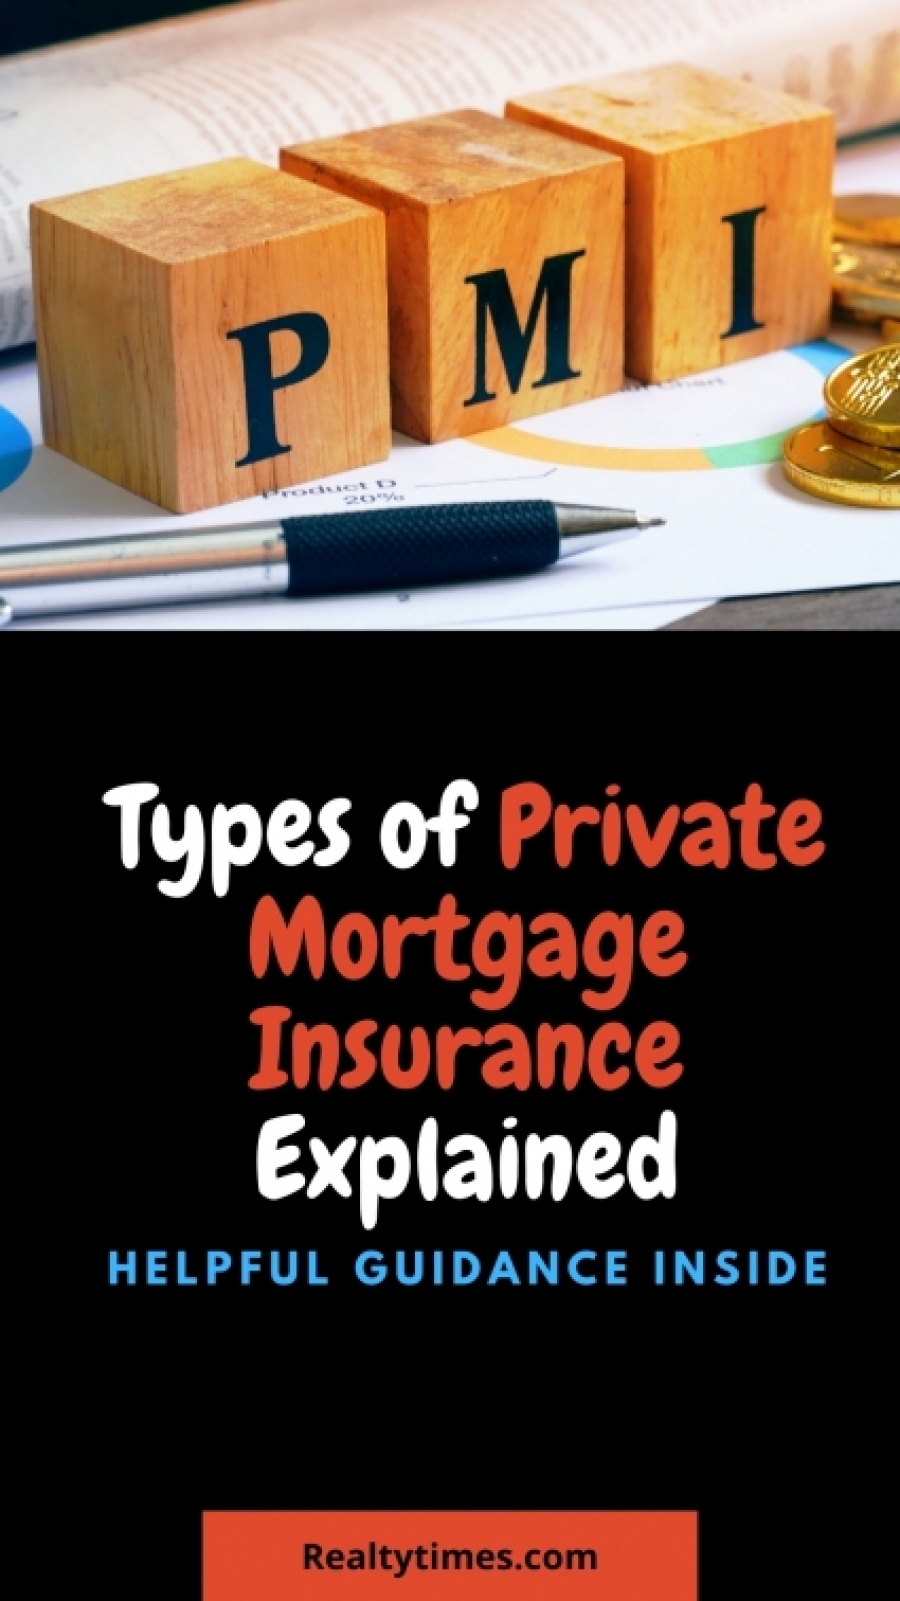 What is Private Mortgage Insurance